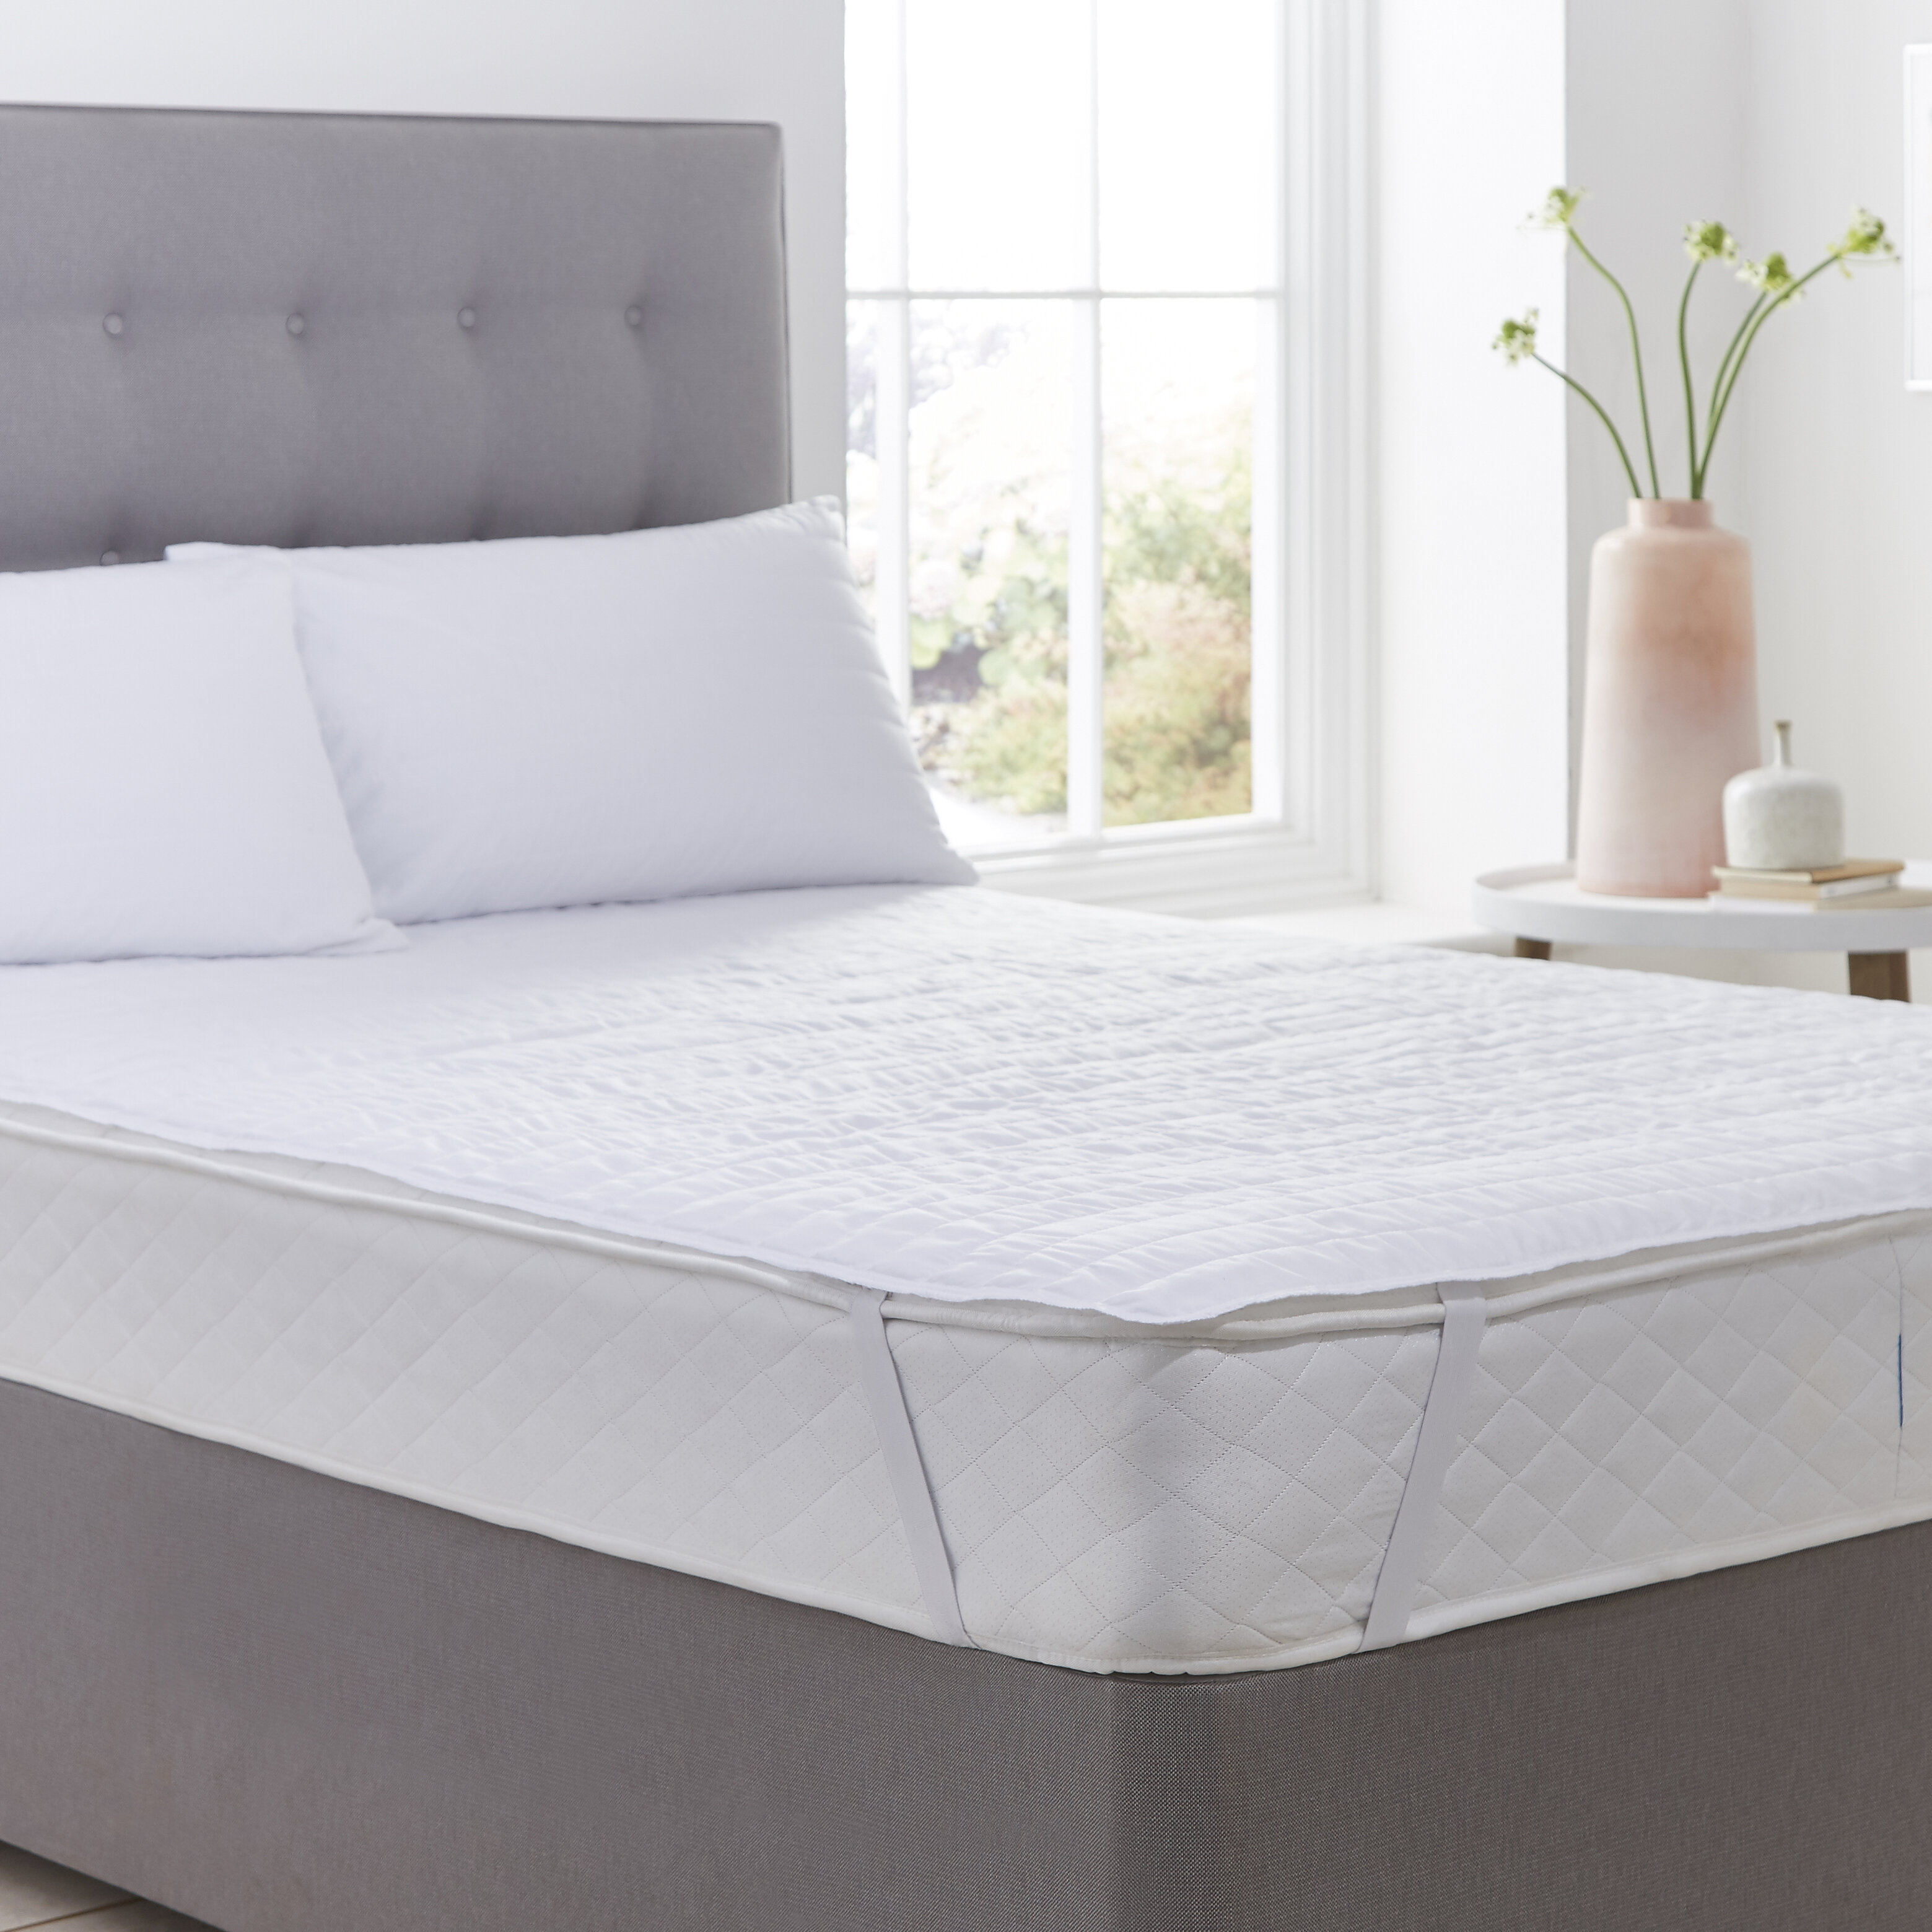 Extra Deep Quilted fitted mattress  protector hygienic non allergenic double